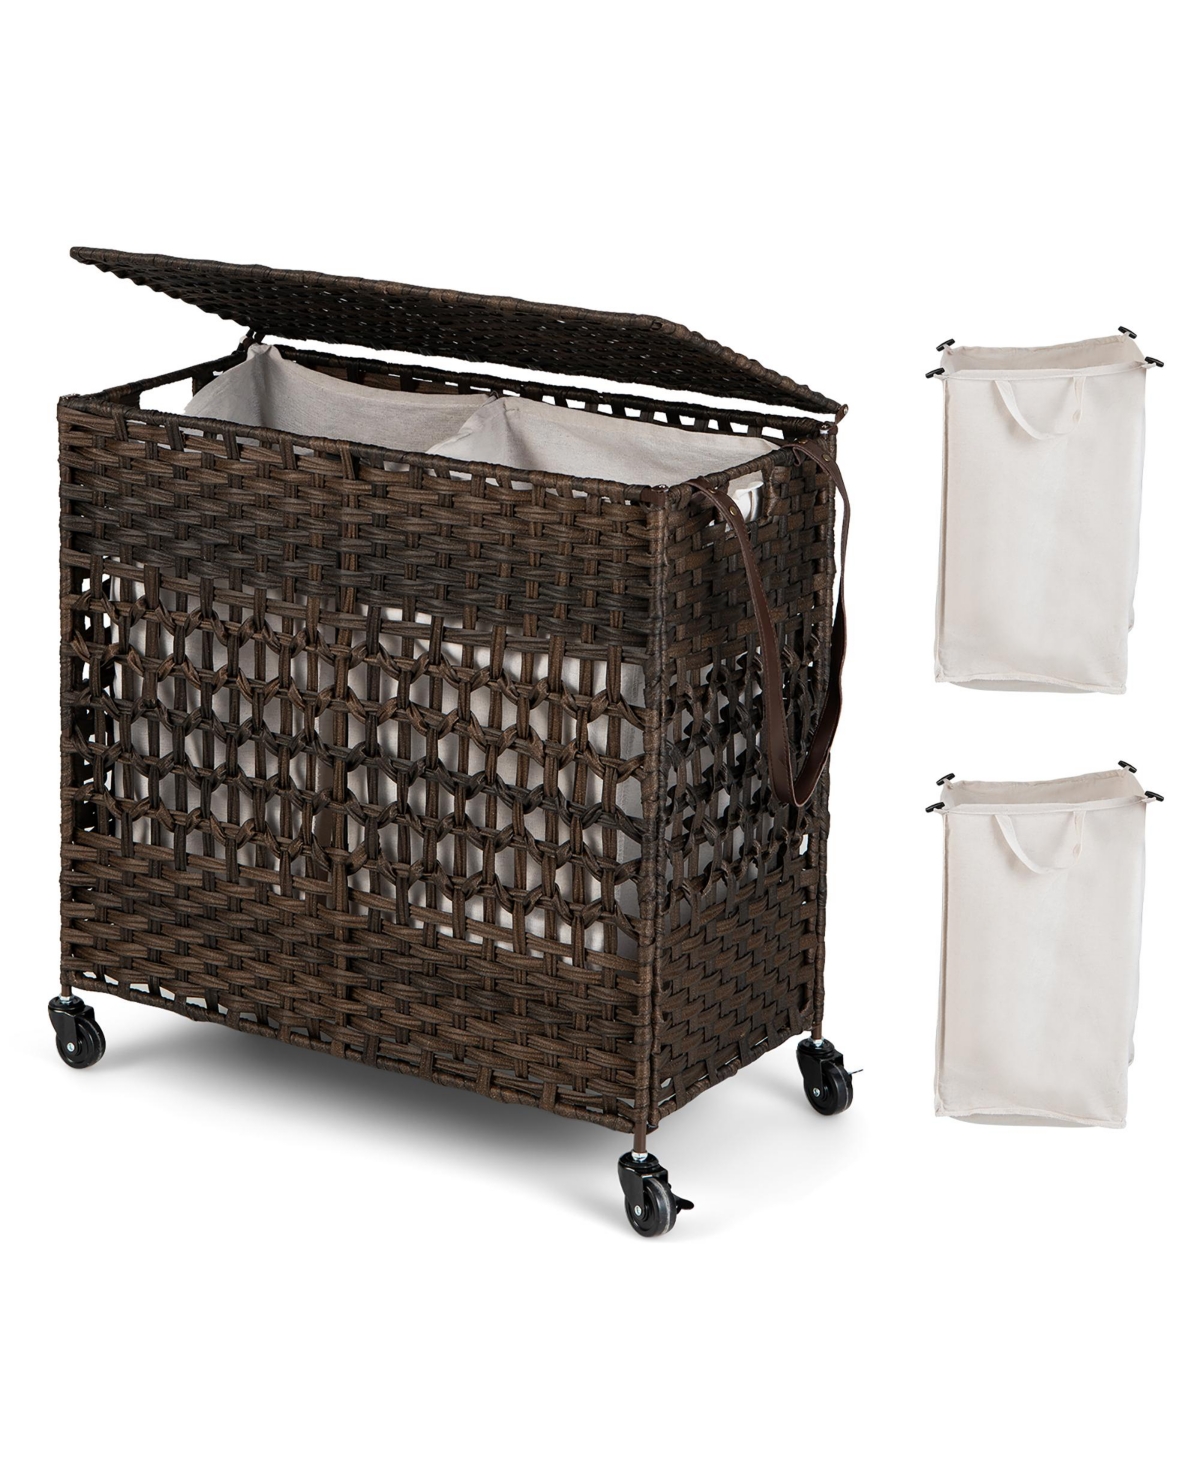 110L Laundry Hamper w/Wheels Clothes Basket w/Lid and Handle and 2 Liner Bags - Brown